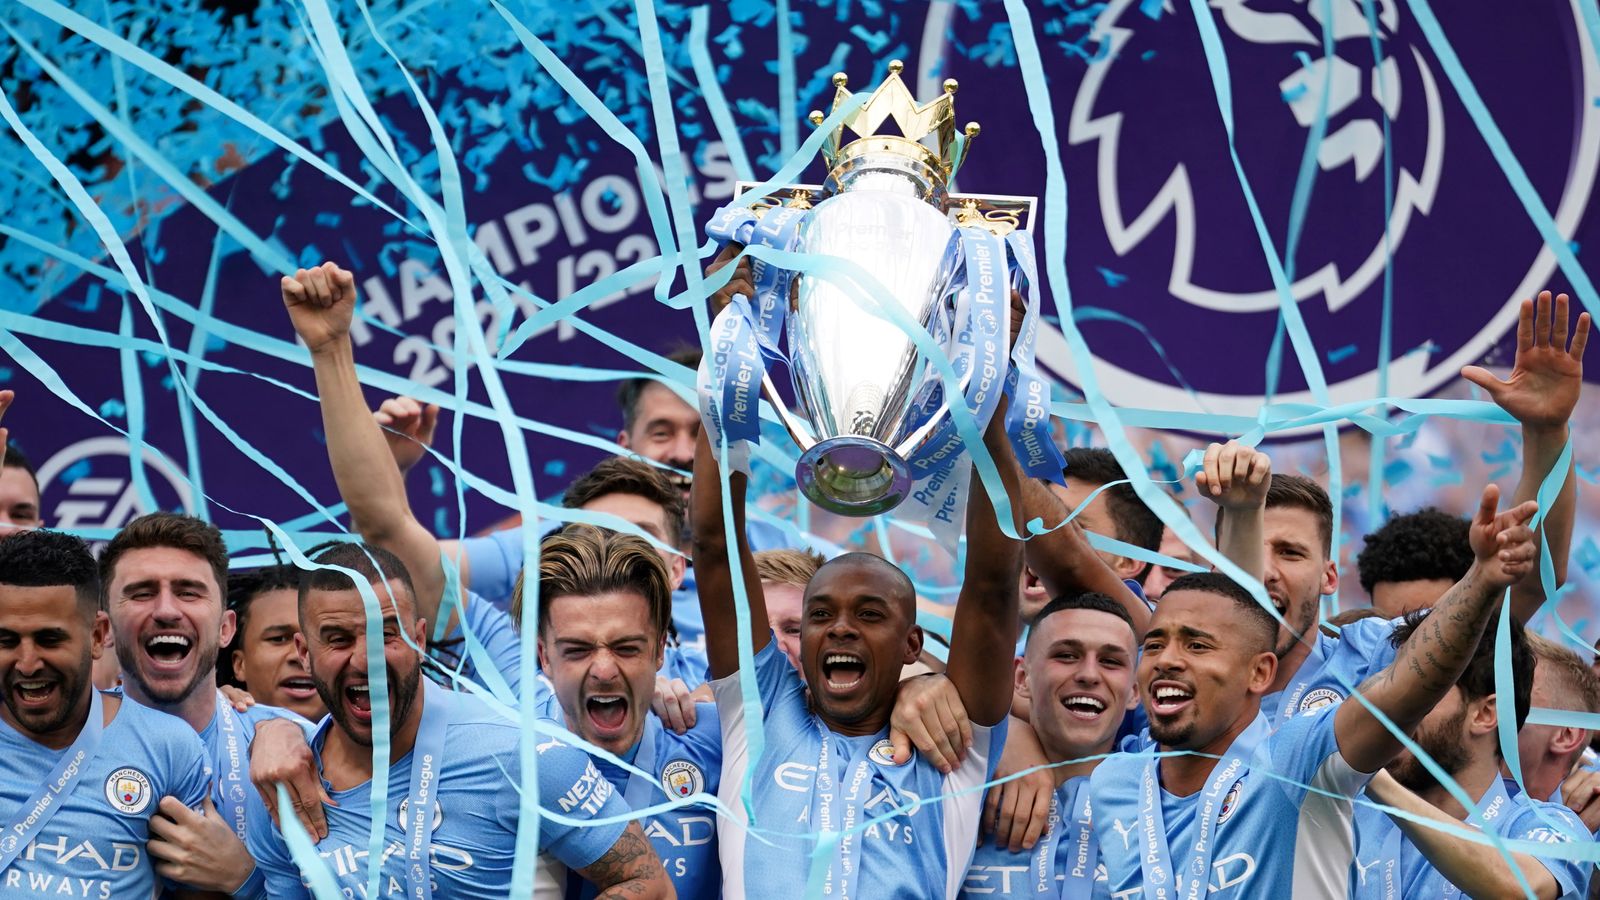 Premier League 2022/23: When does the season start? What are the key dates? When’s the World Cup?